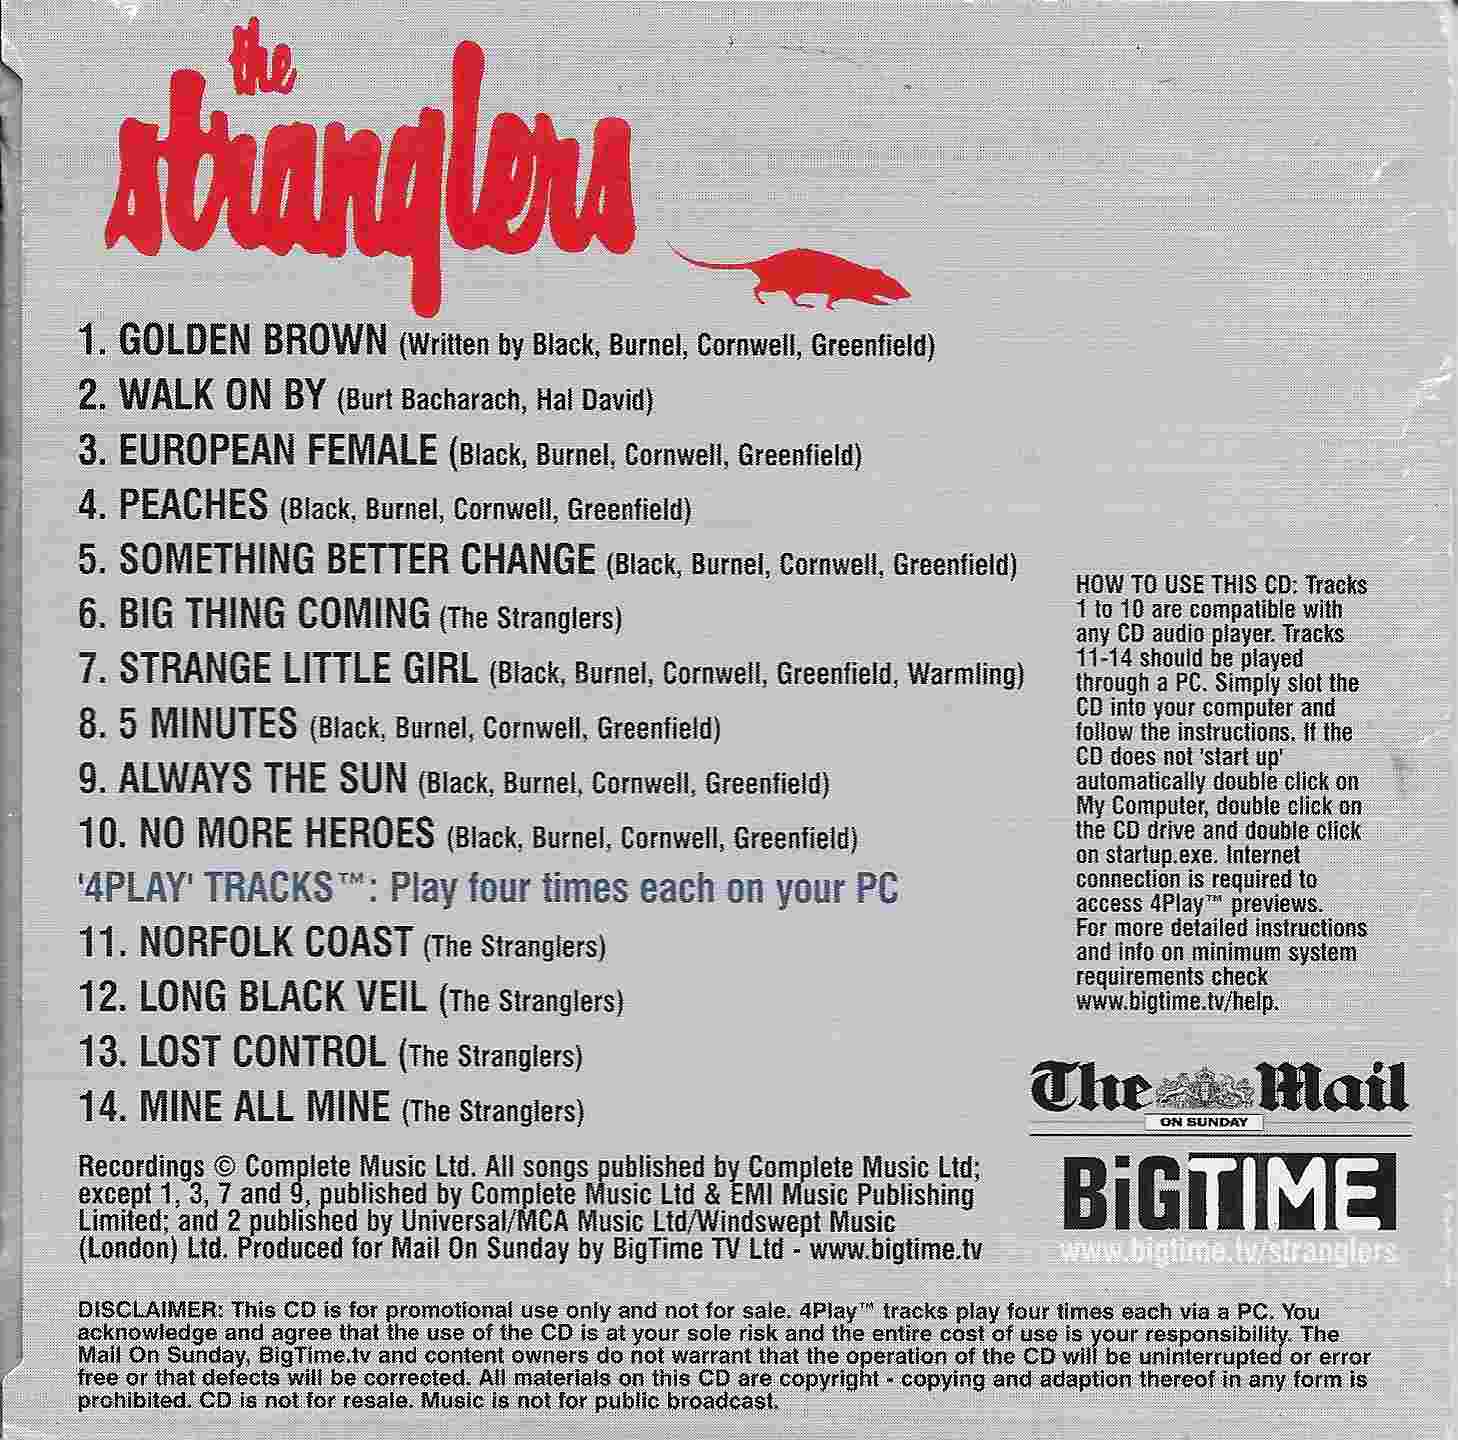 Picture of 2100000 486526 10 track collectors album by artist The Stranglers  from The Stranglers